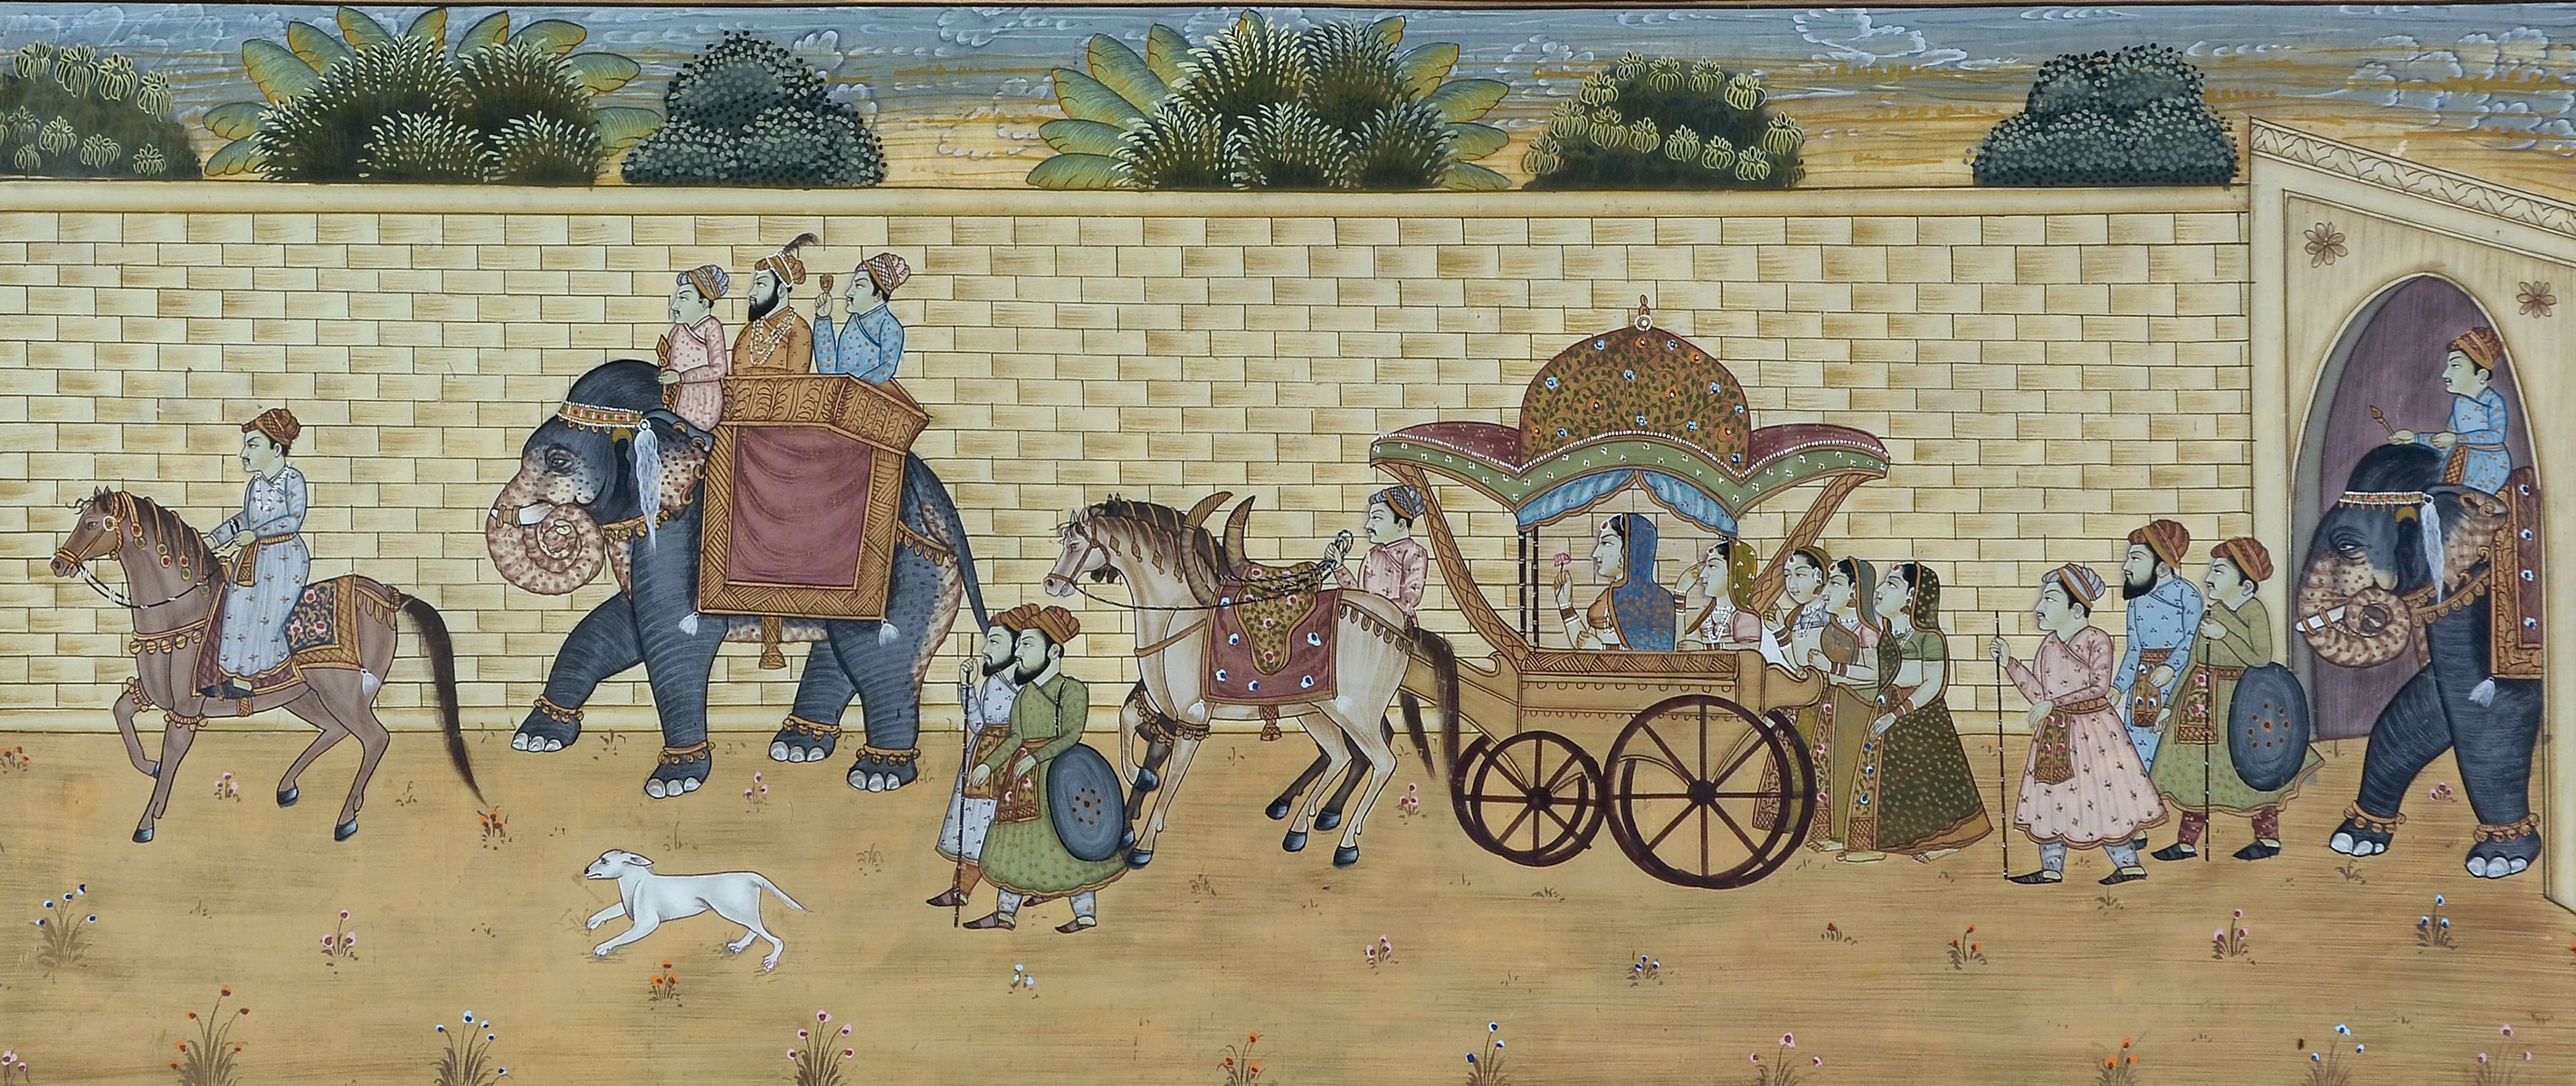 INDIAN NOBLE PROCESSION PAINTING  276e5d